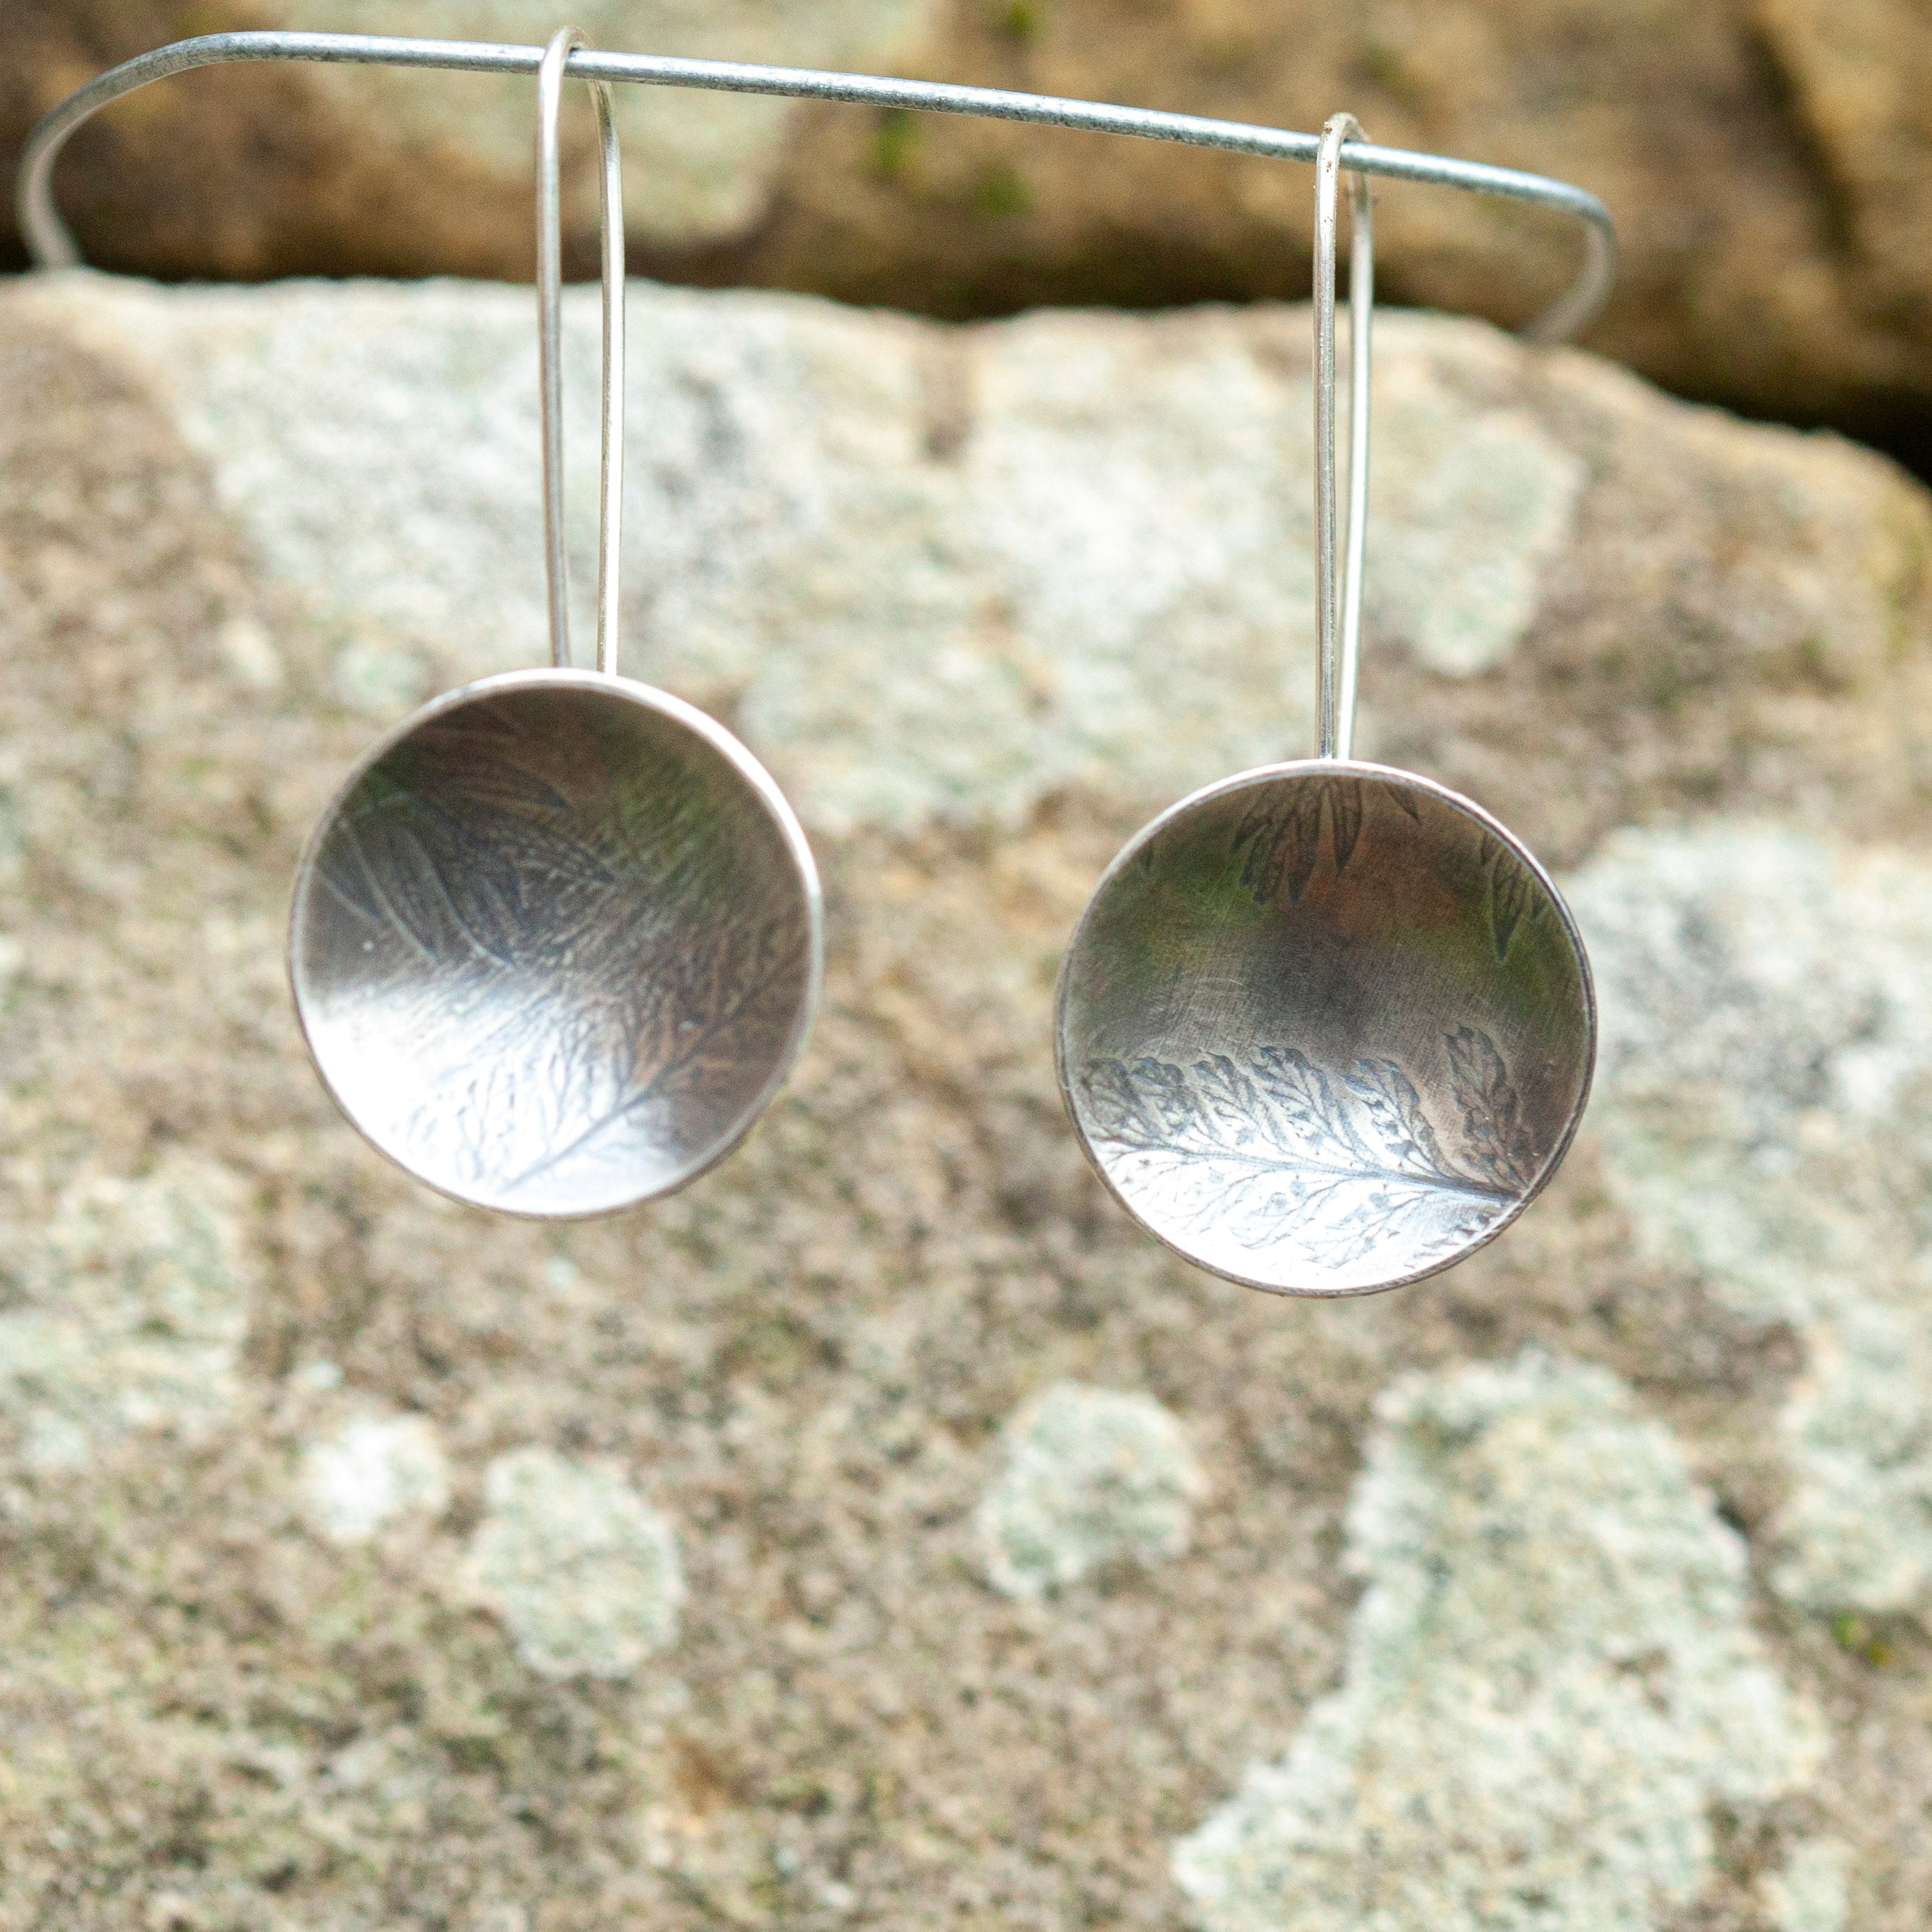 OOAK dangle earrings with plant imprint #7 • silver (ready-to-ship)